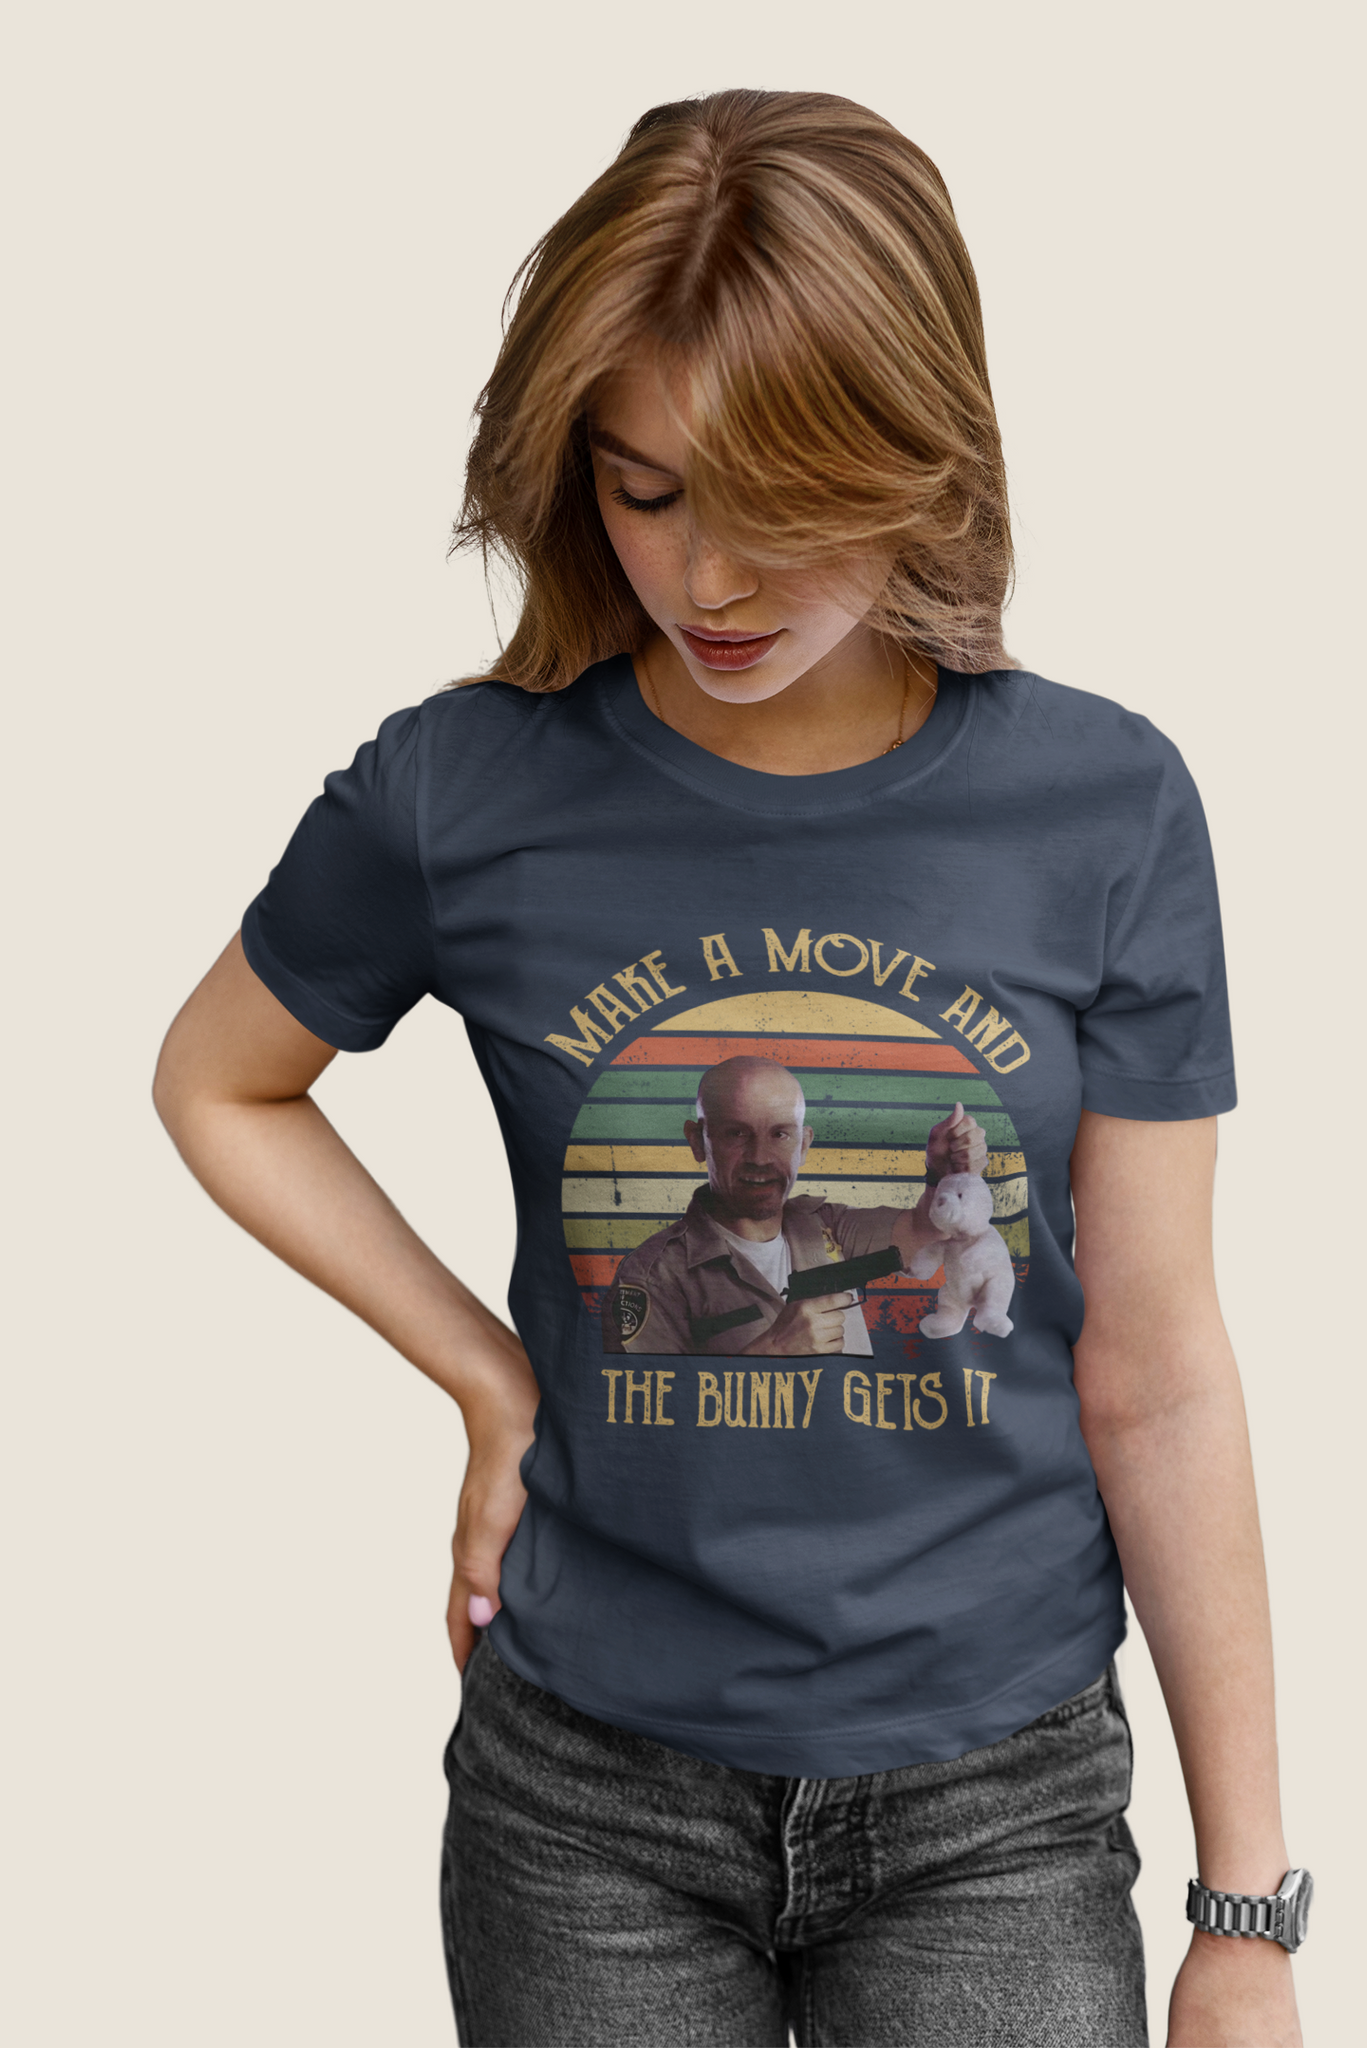 Con Air Vintage T Shirt, Cyrus Grissom T Shirt, Make A Move And The Bunny Gets It Tshirt